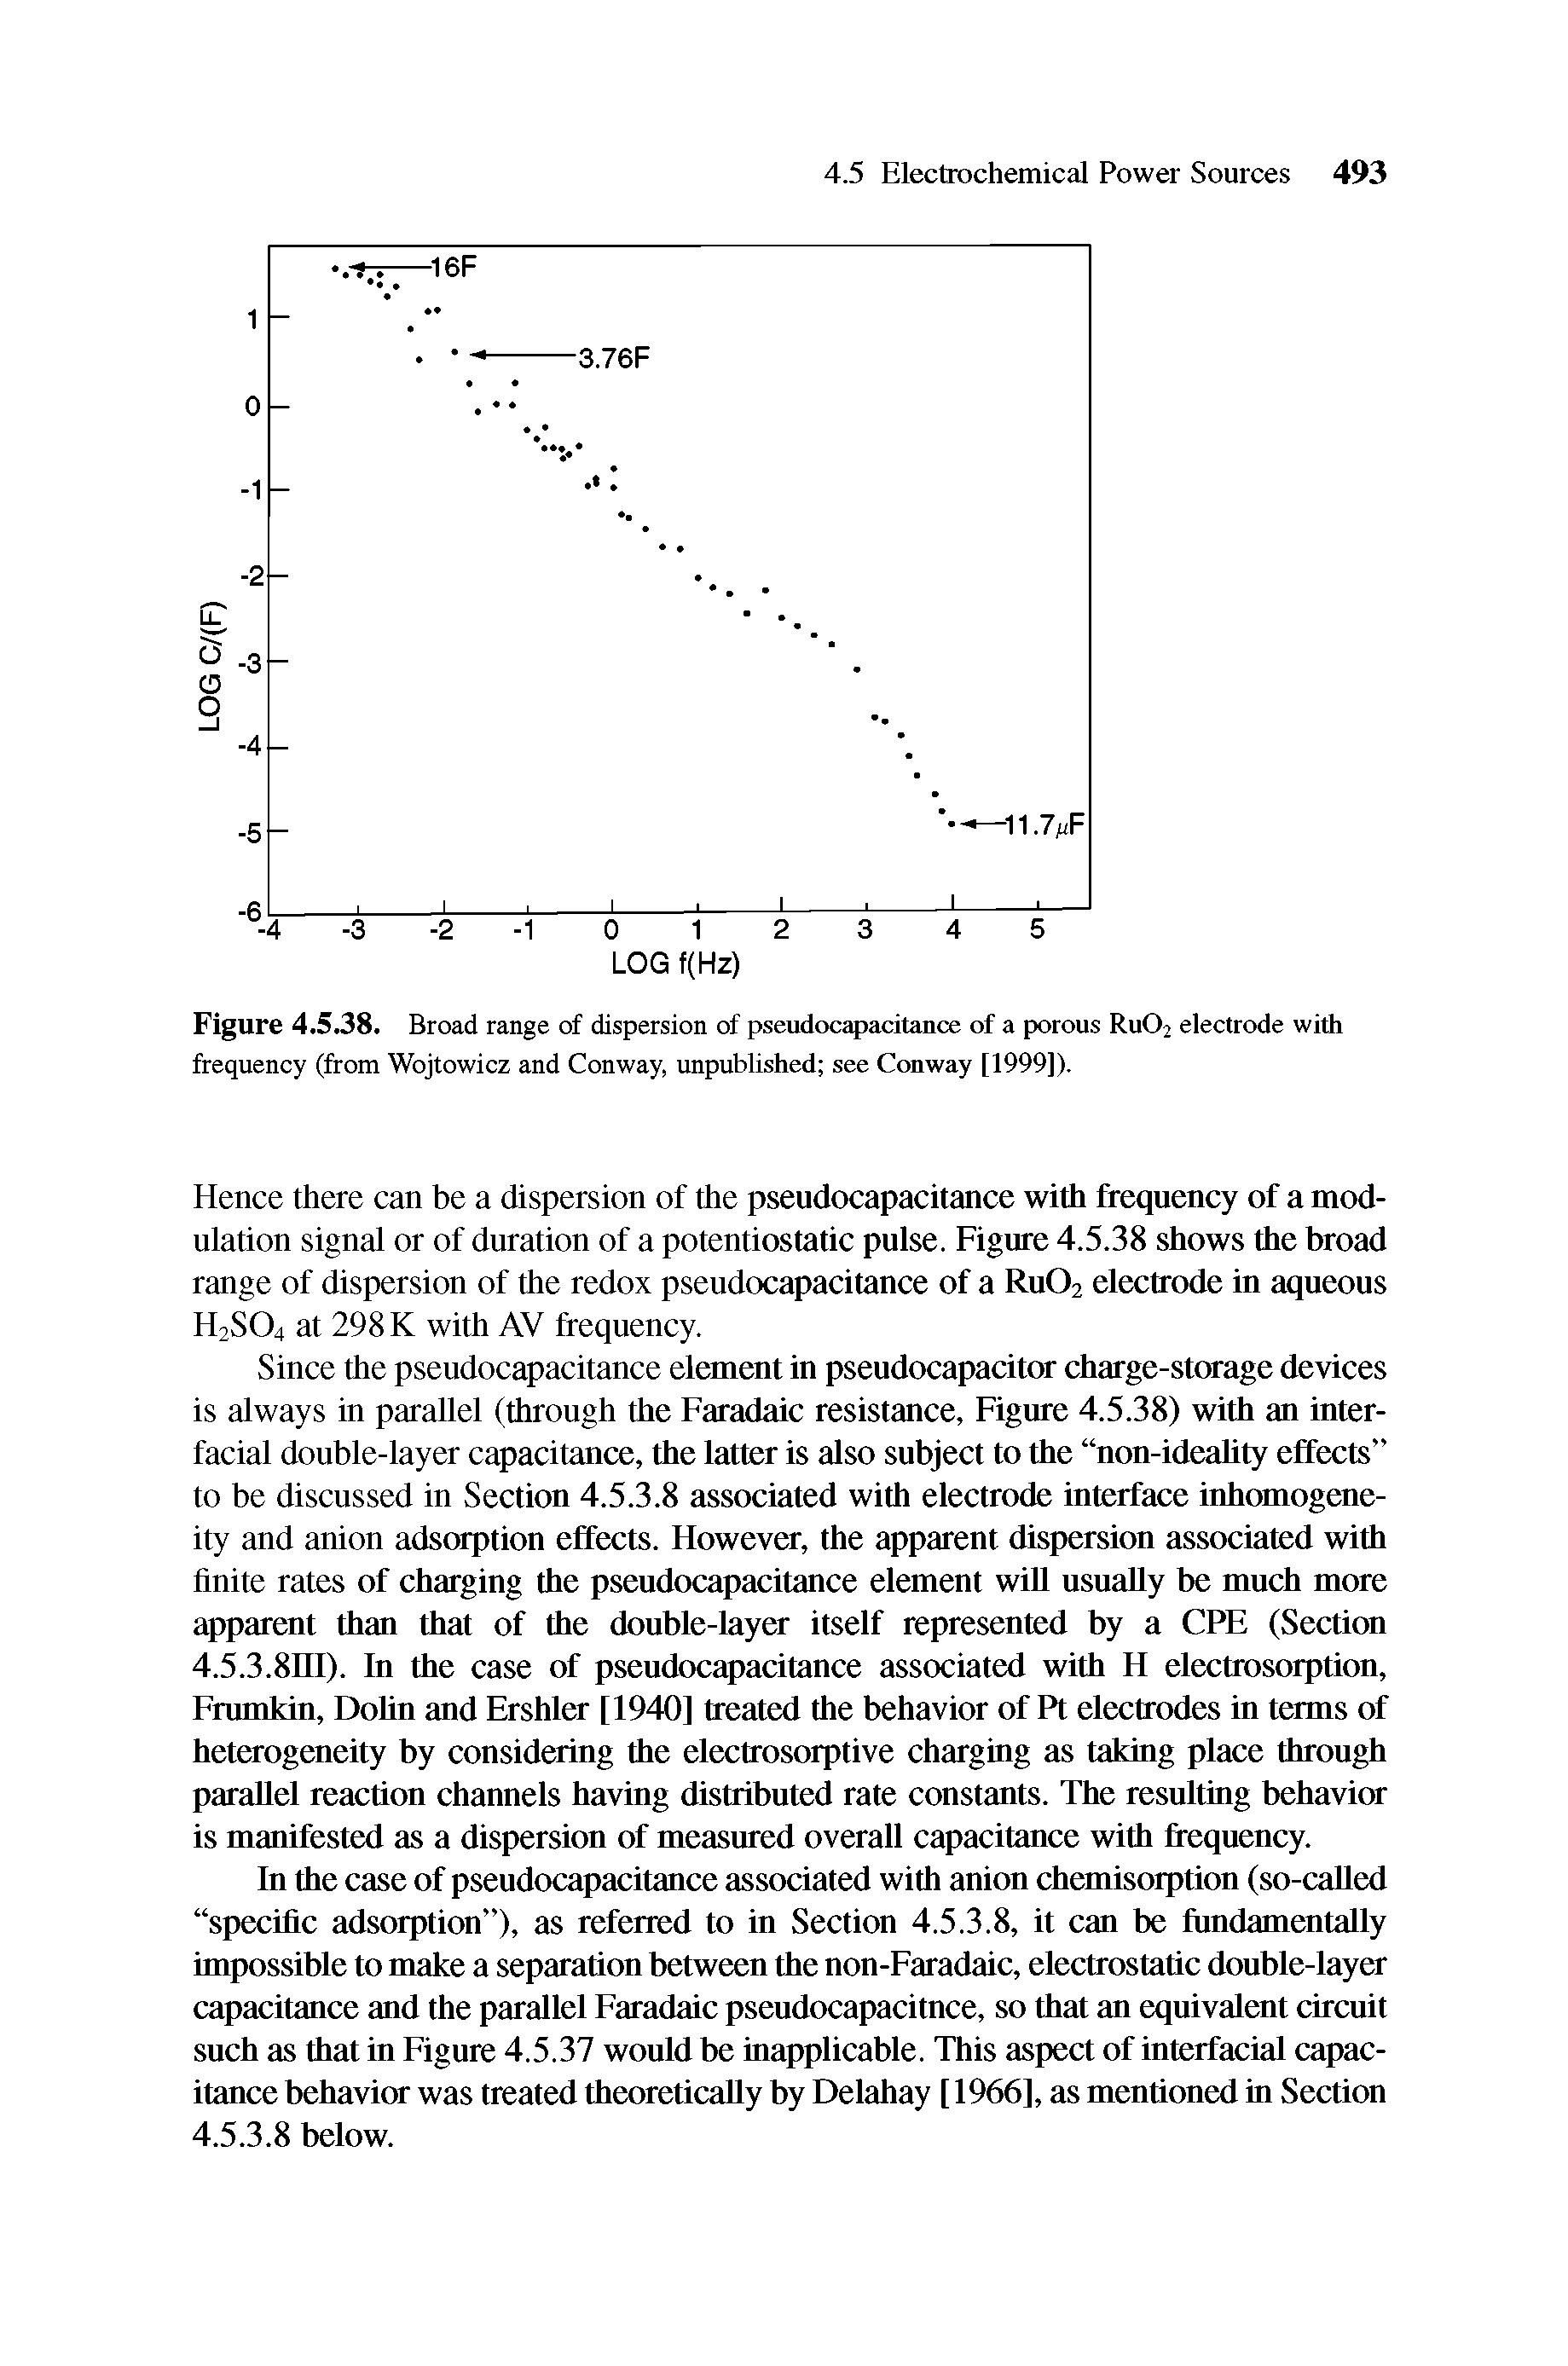 Figure 4.538. Broad range of dispersion of pseudocapacitance of a porous RUO2 electrode with frequency (from Wojtowicz and Conway, unpublished see Conway [1999]).